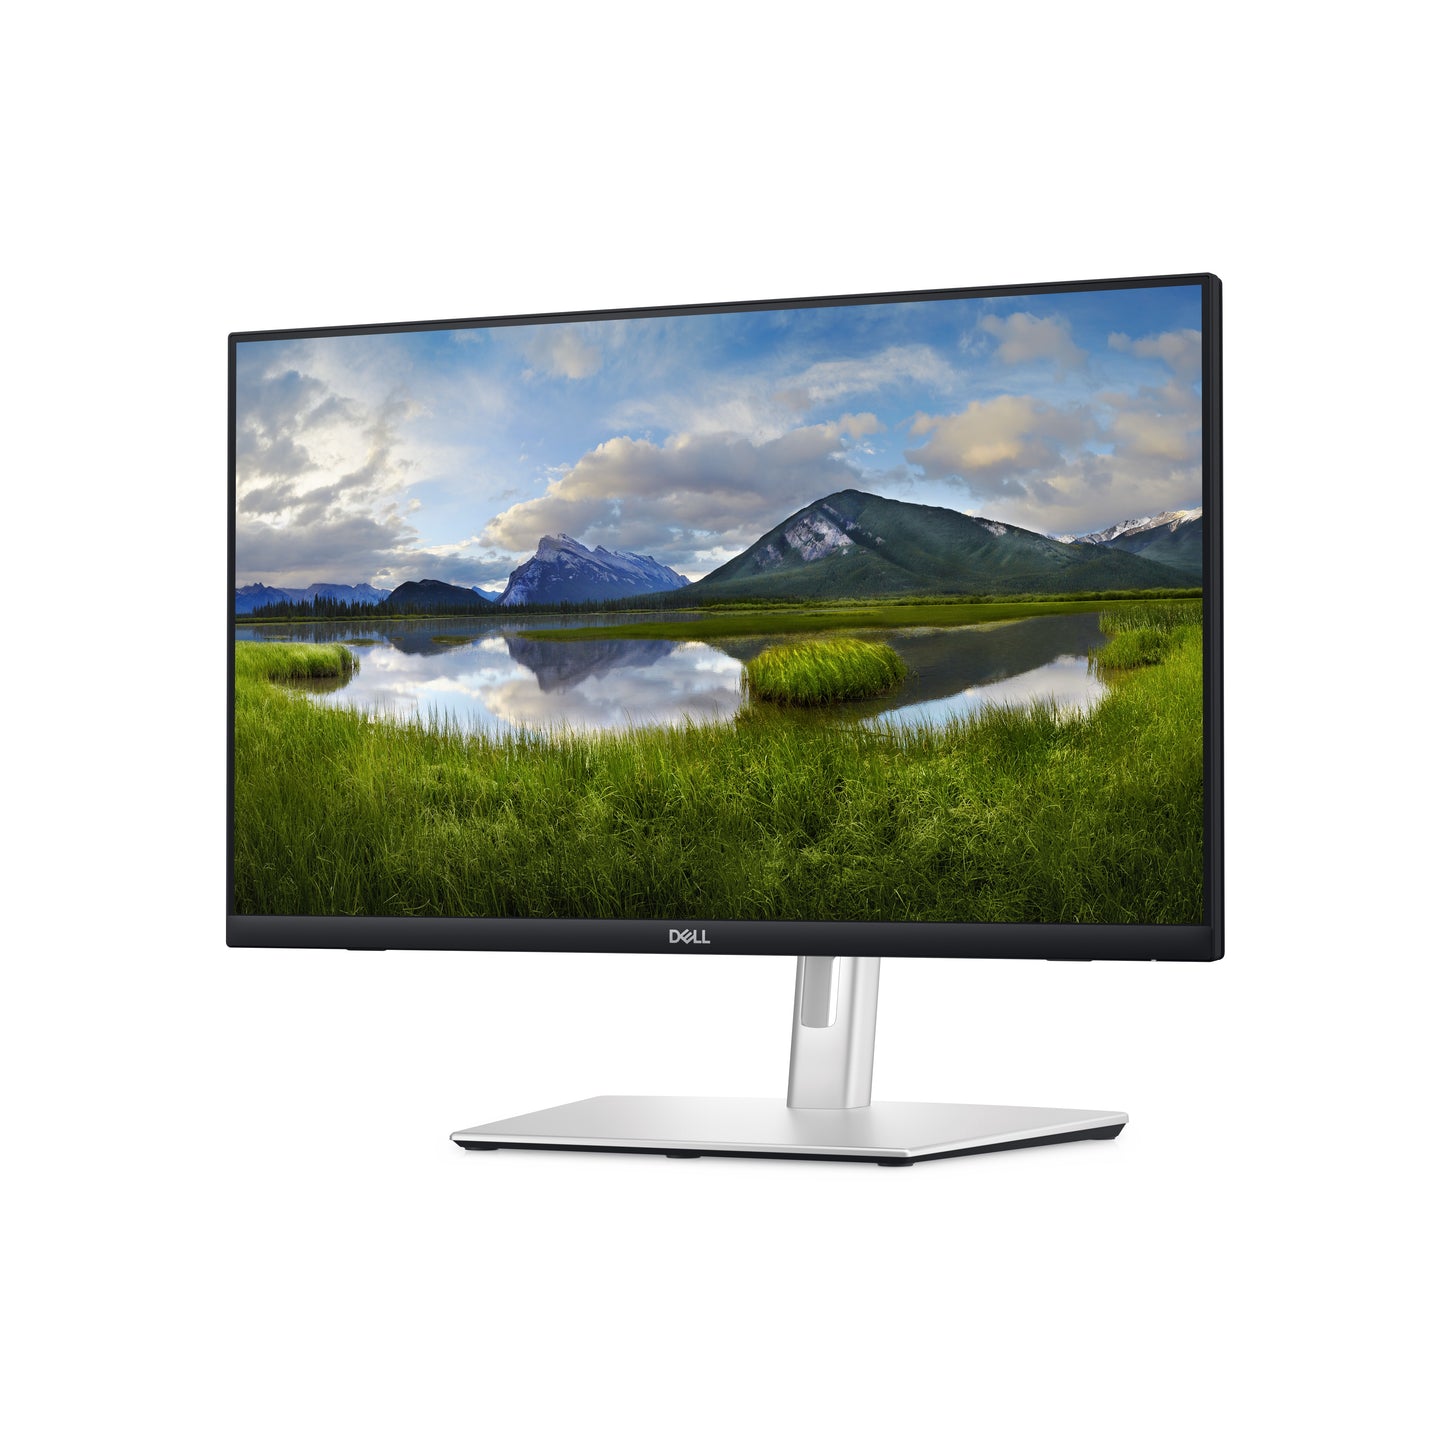 DELL P Series P2424HT computer monitor 60.5 cm (23.8") 1920 x 1080 pixels Full HD LCD Touchscreen Black, Silver-1